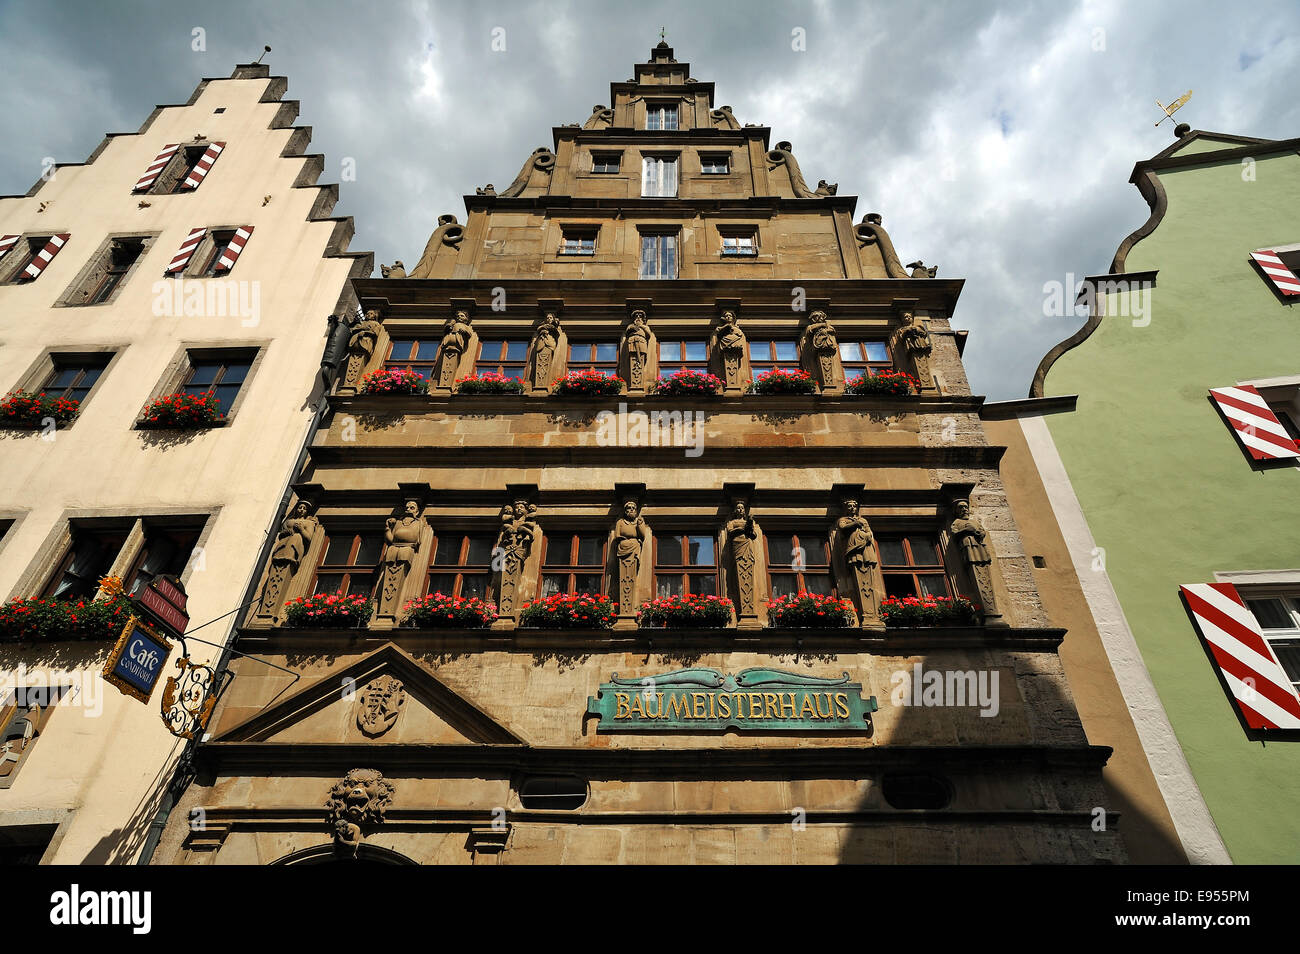 Sandstone facade, Baumeisterhaus from 1596, Rothenburg ob der Tauber, Middle Franconia, Bavaria, Germany Stock Photo